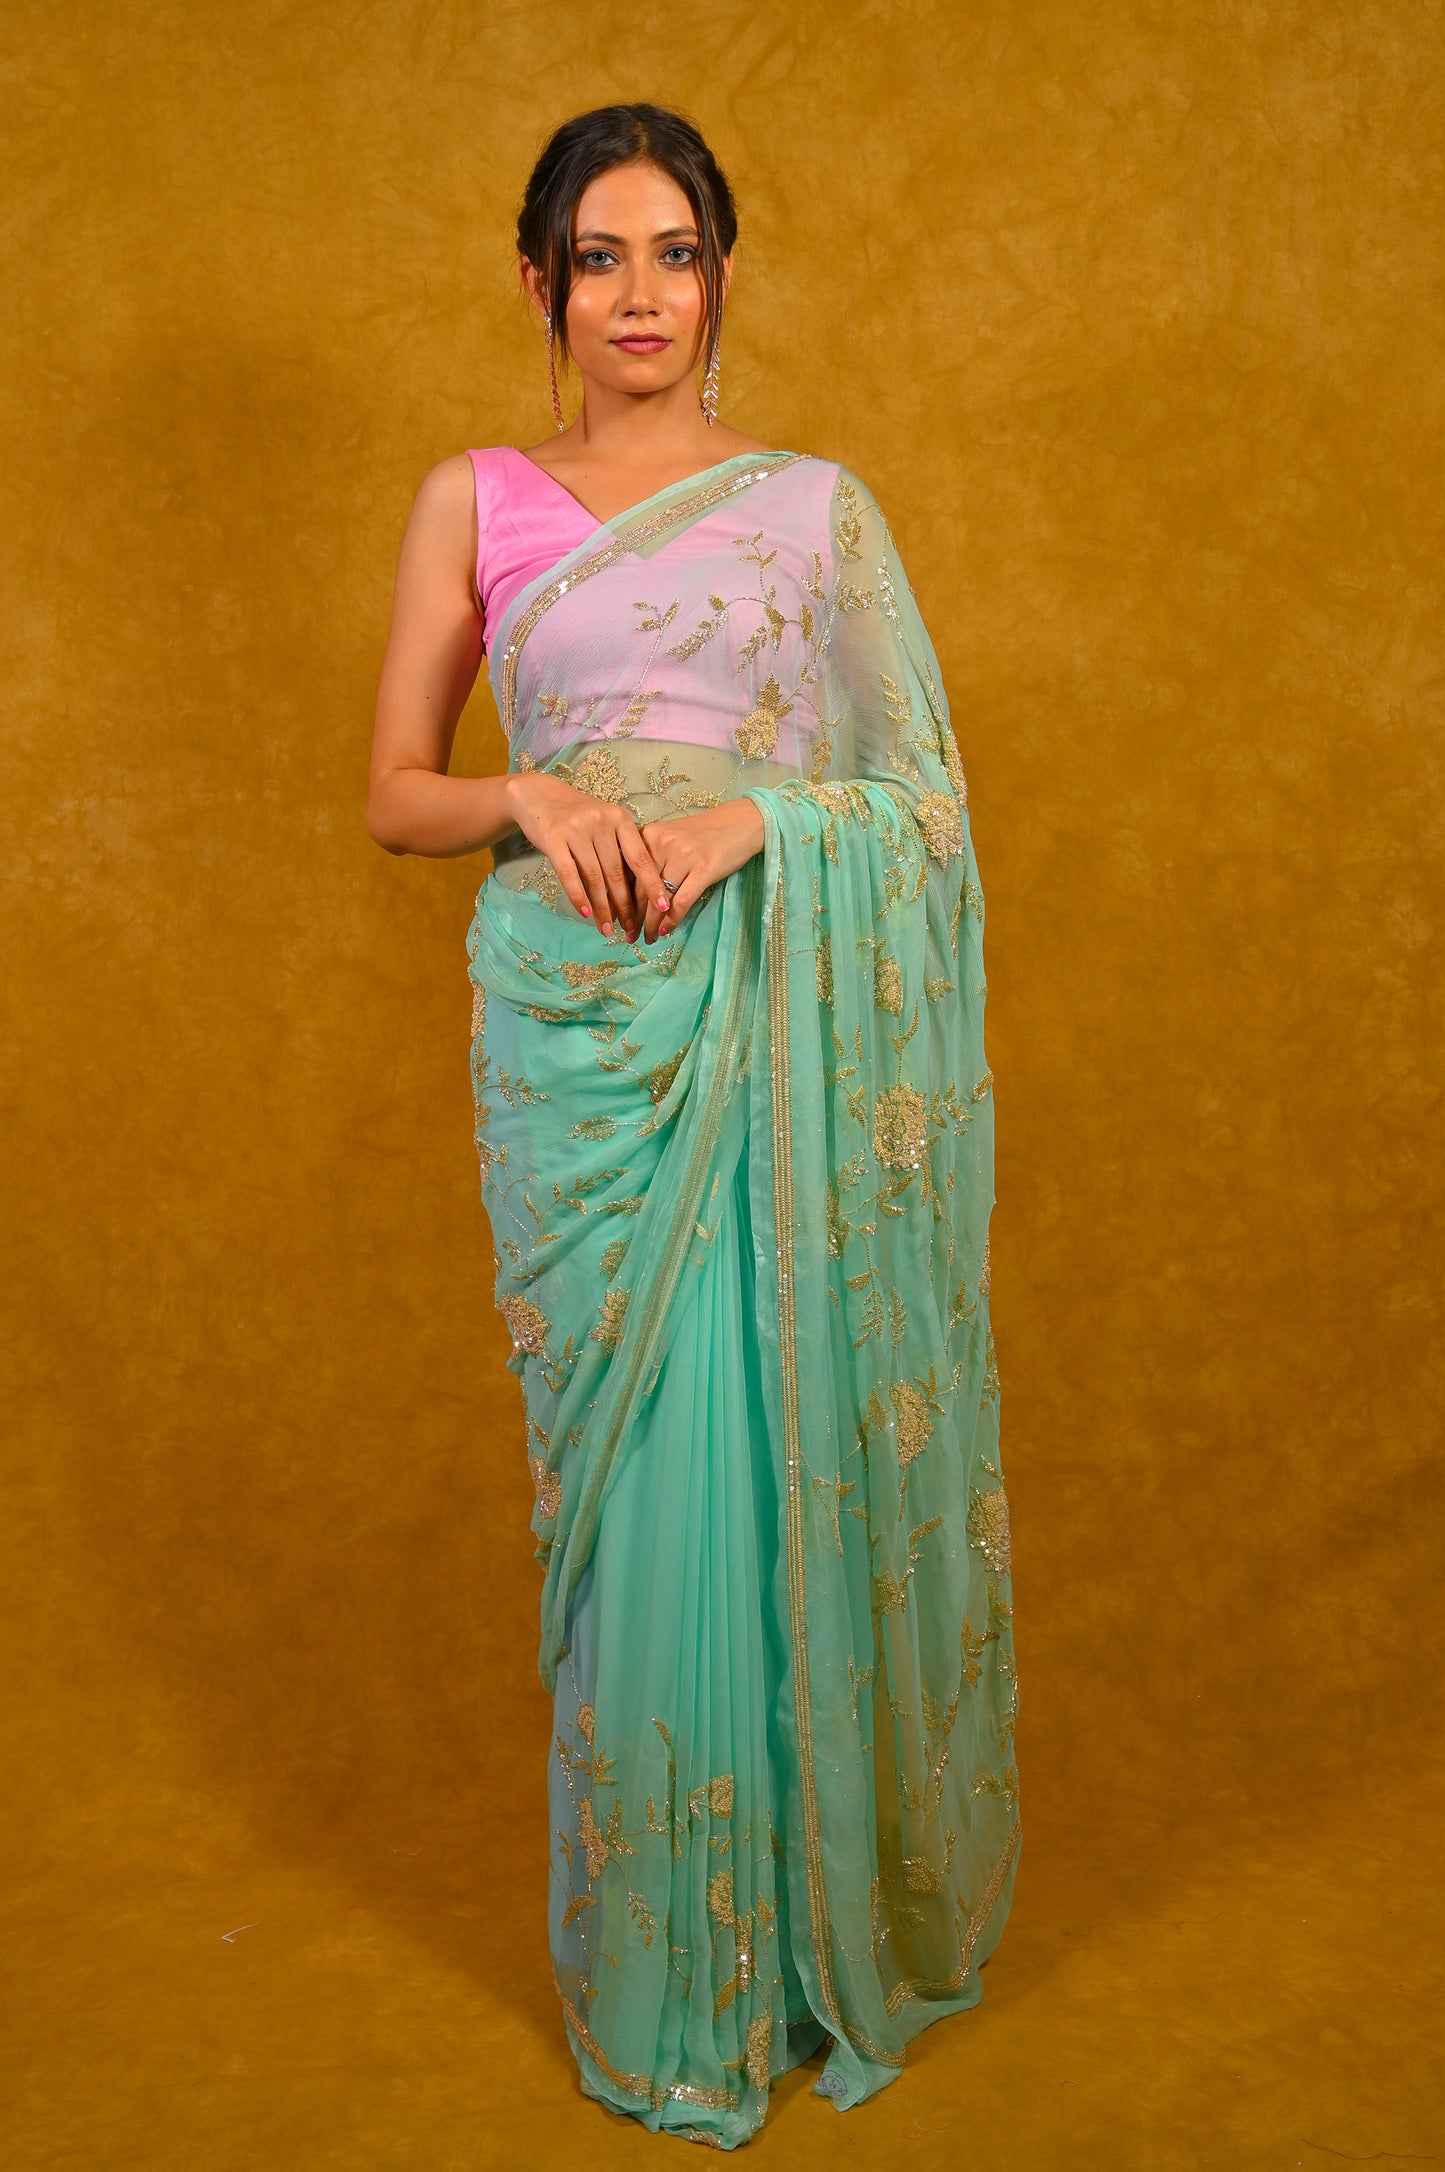 SEA GREEN PURE CHIFFON EMBROIDERY SAREE WITH HAND EMBROIDERED WORK